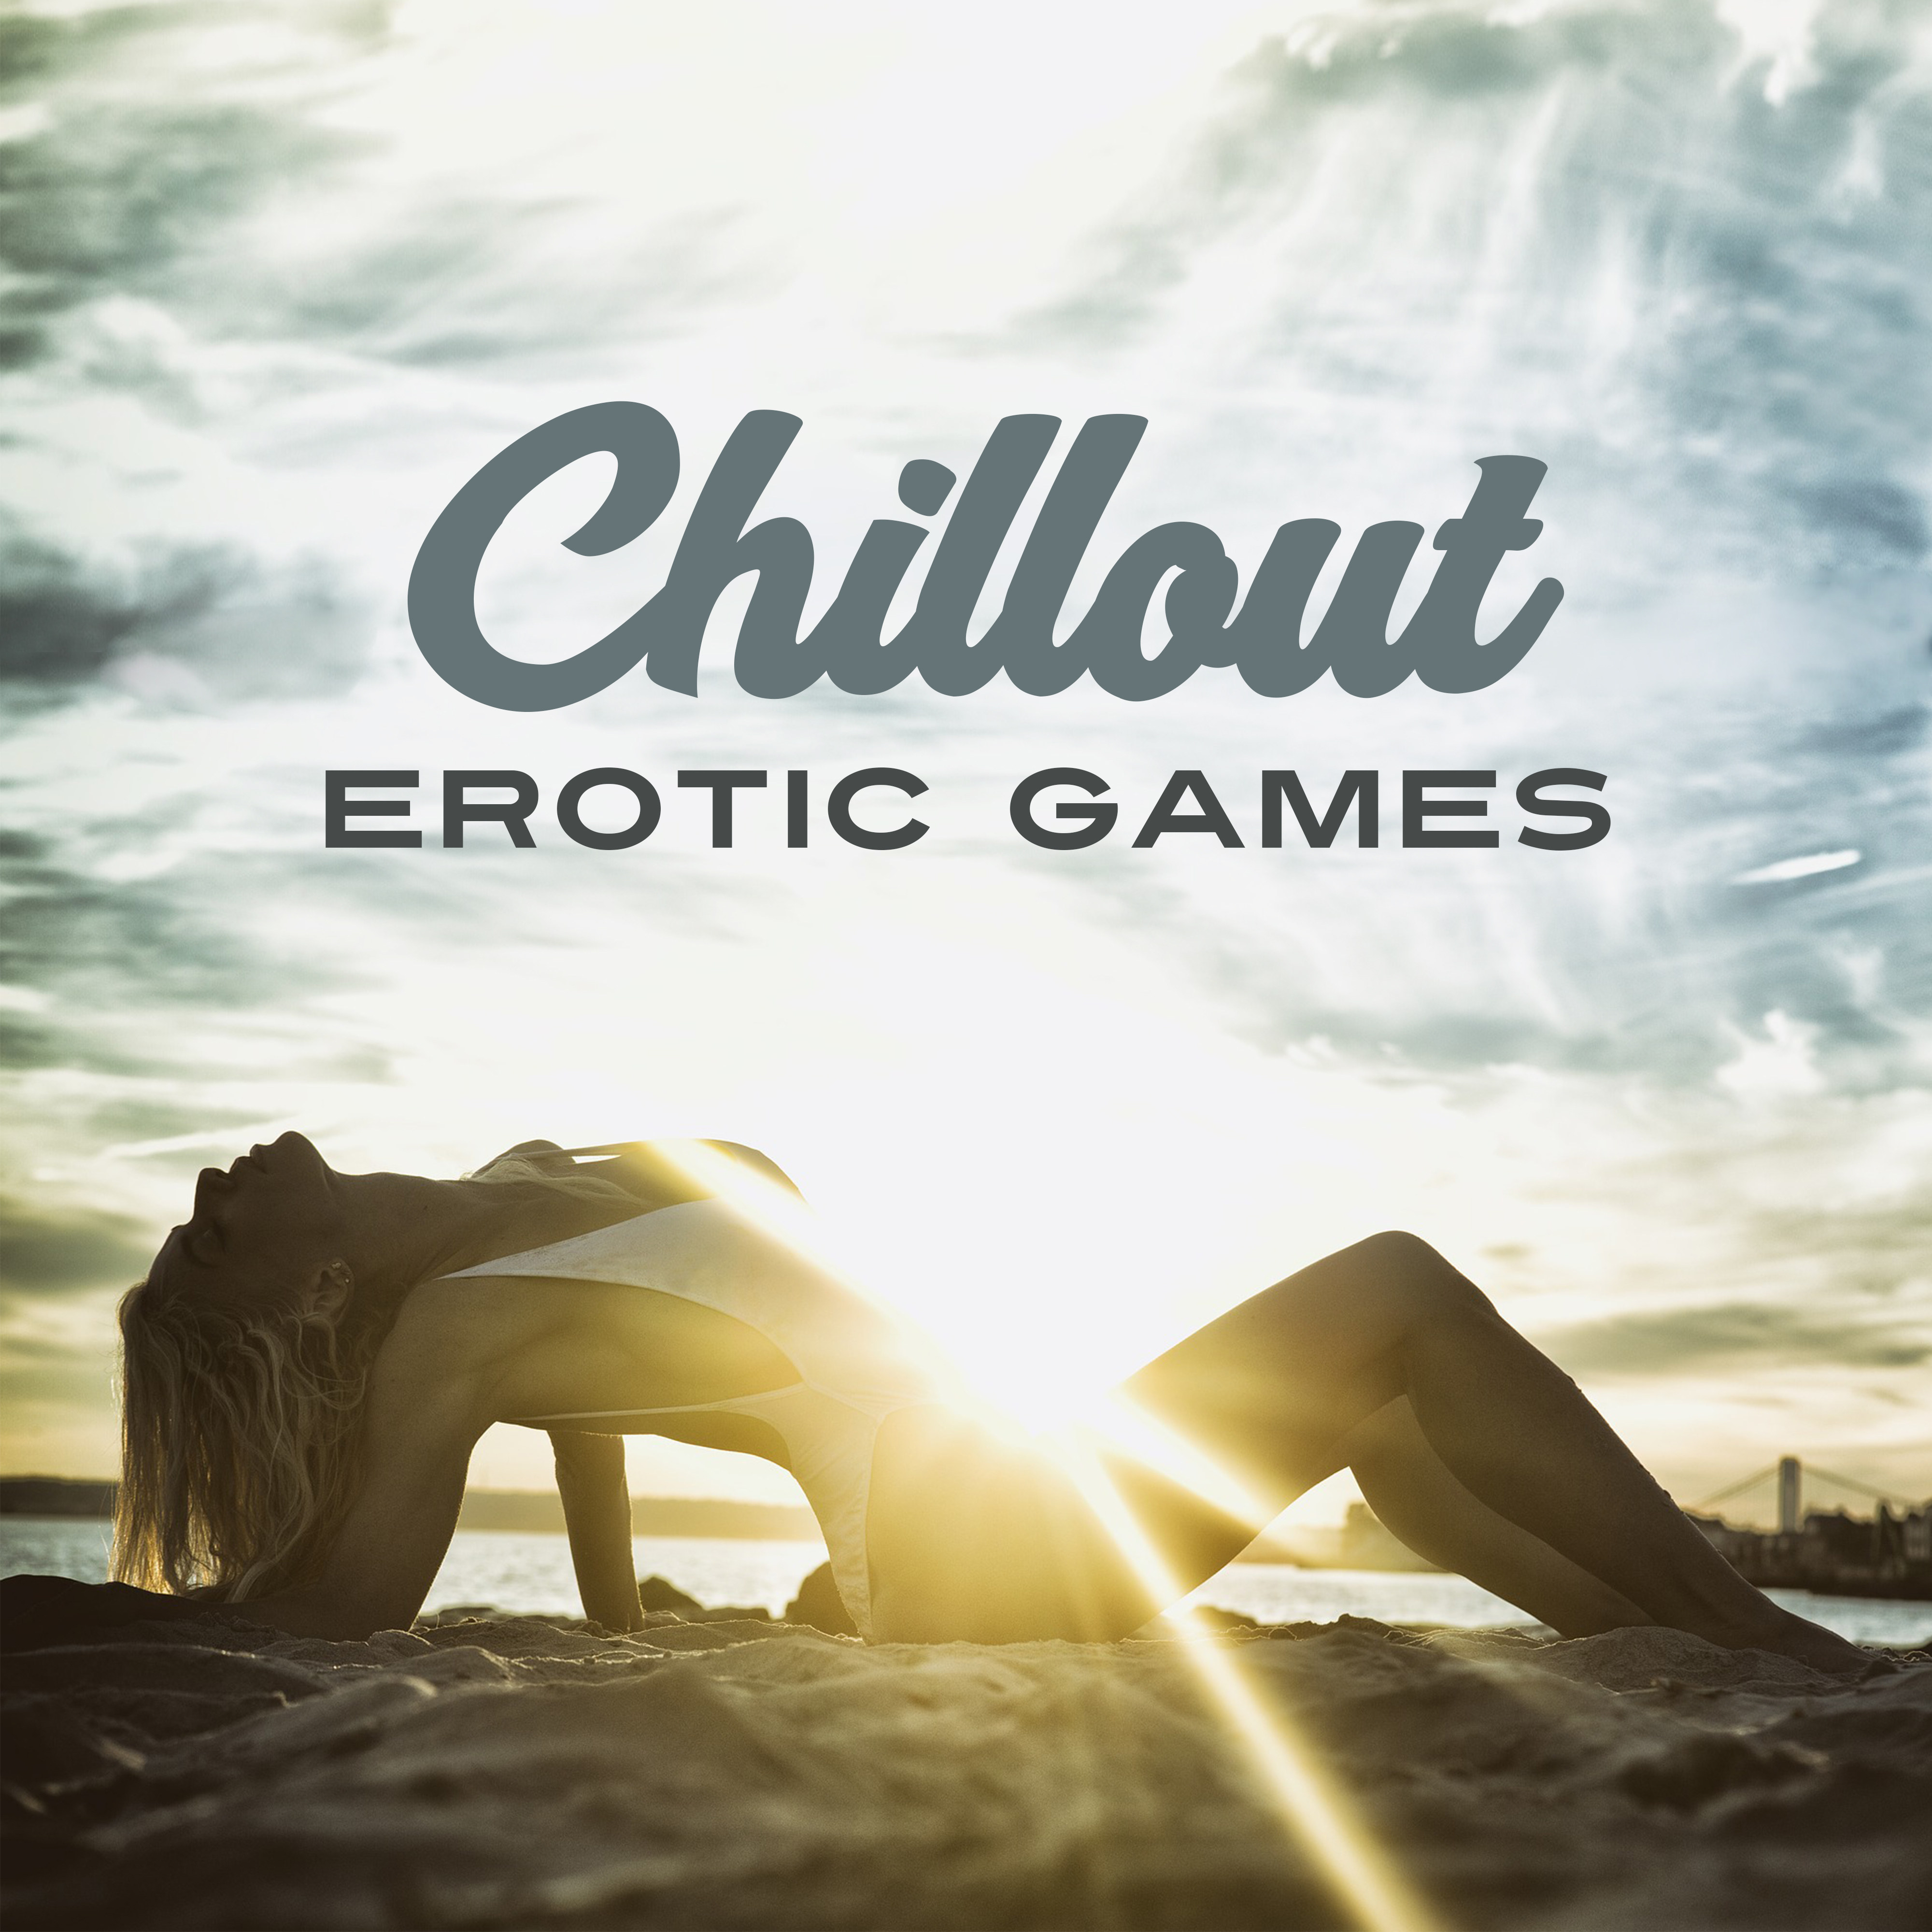 Chillout Erotic Games  Chillout Vibes, Lounge, Erotic Chill Lounge, Making Love